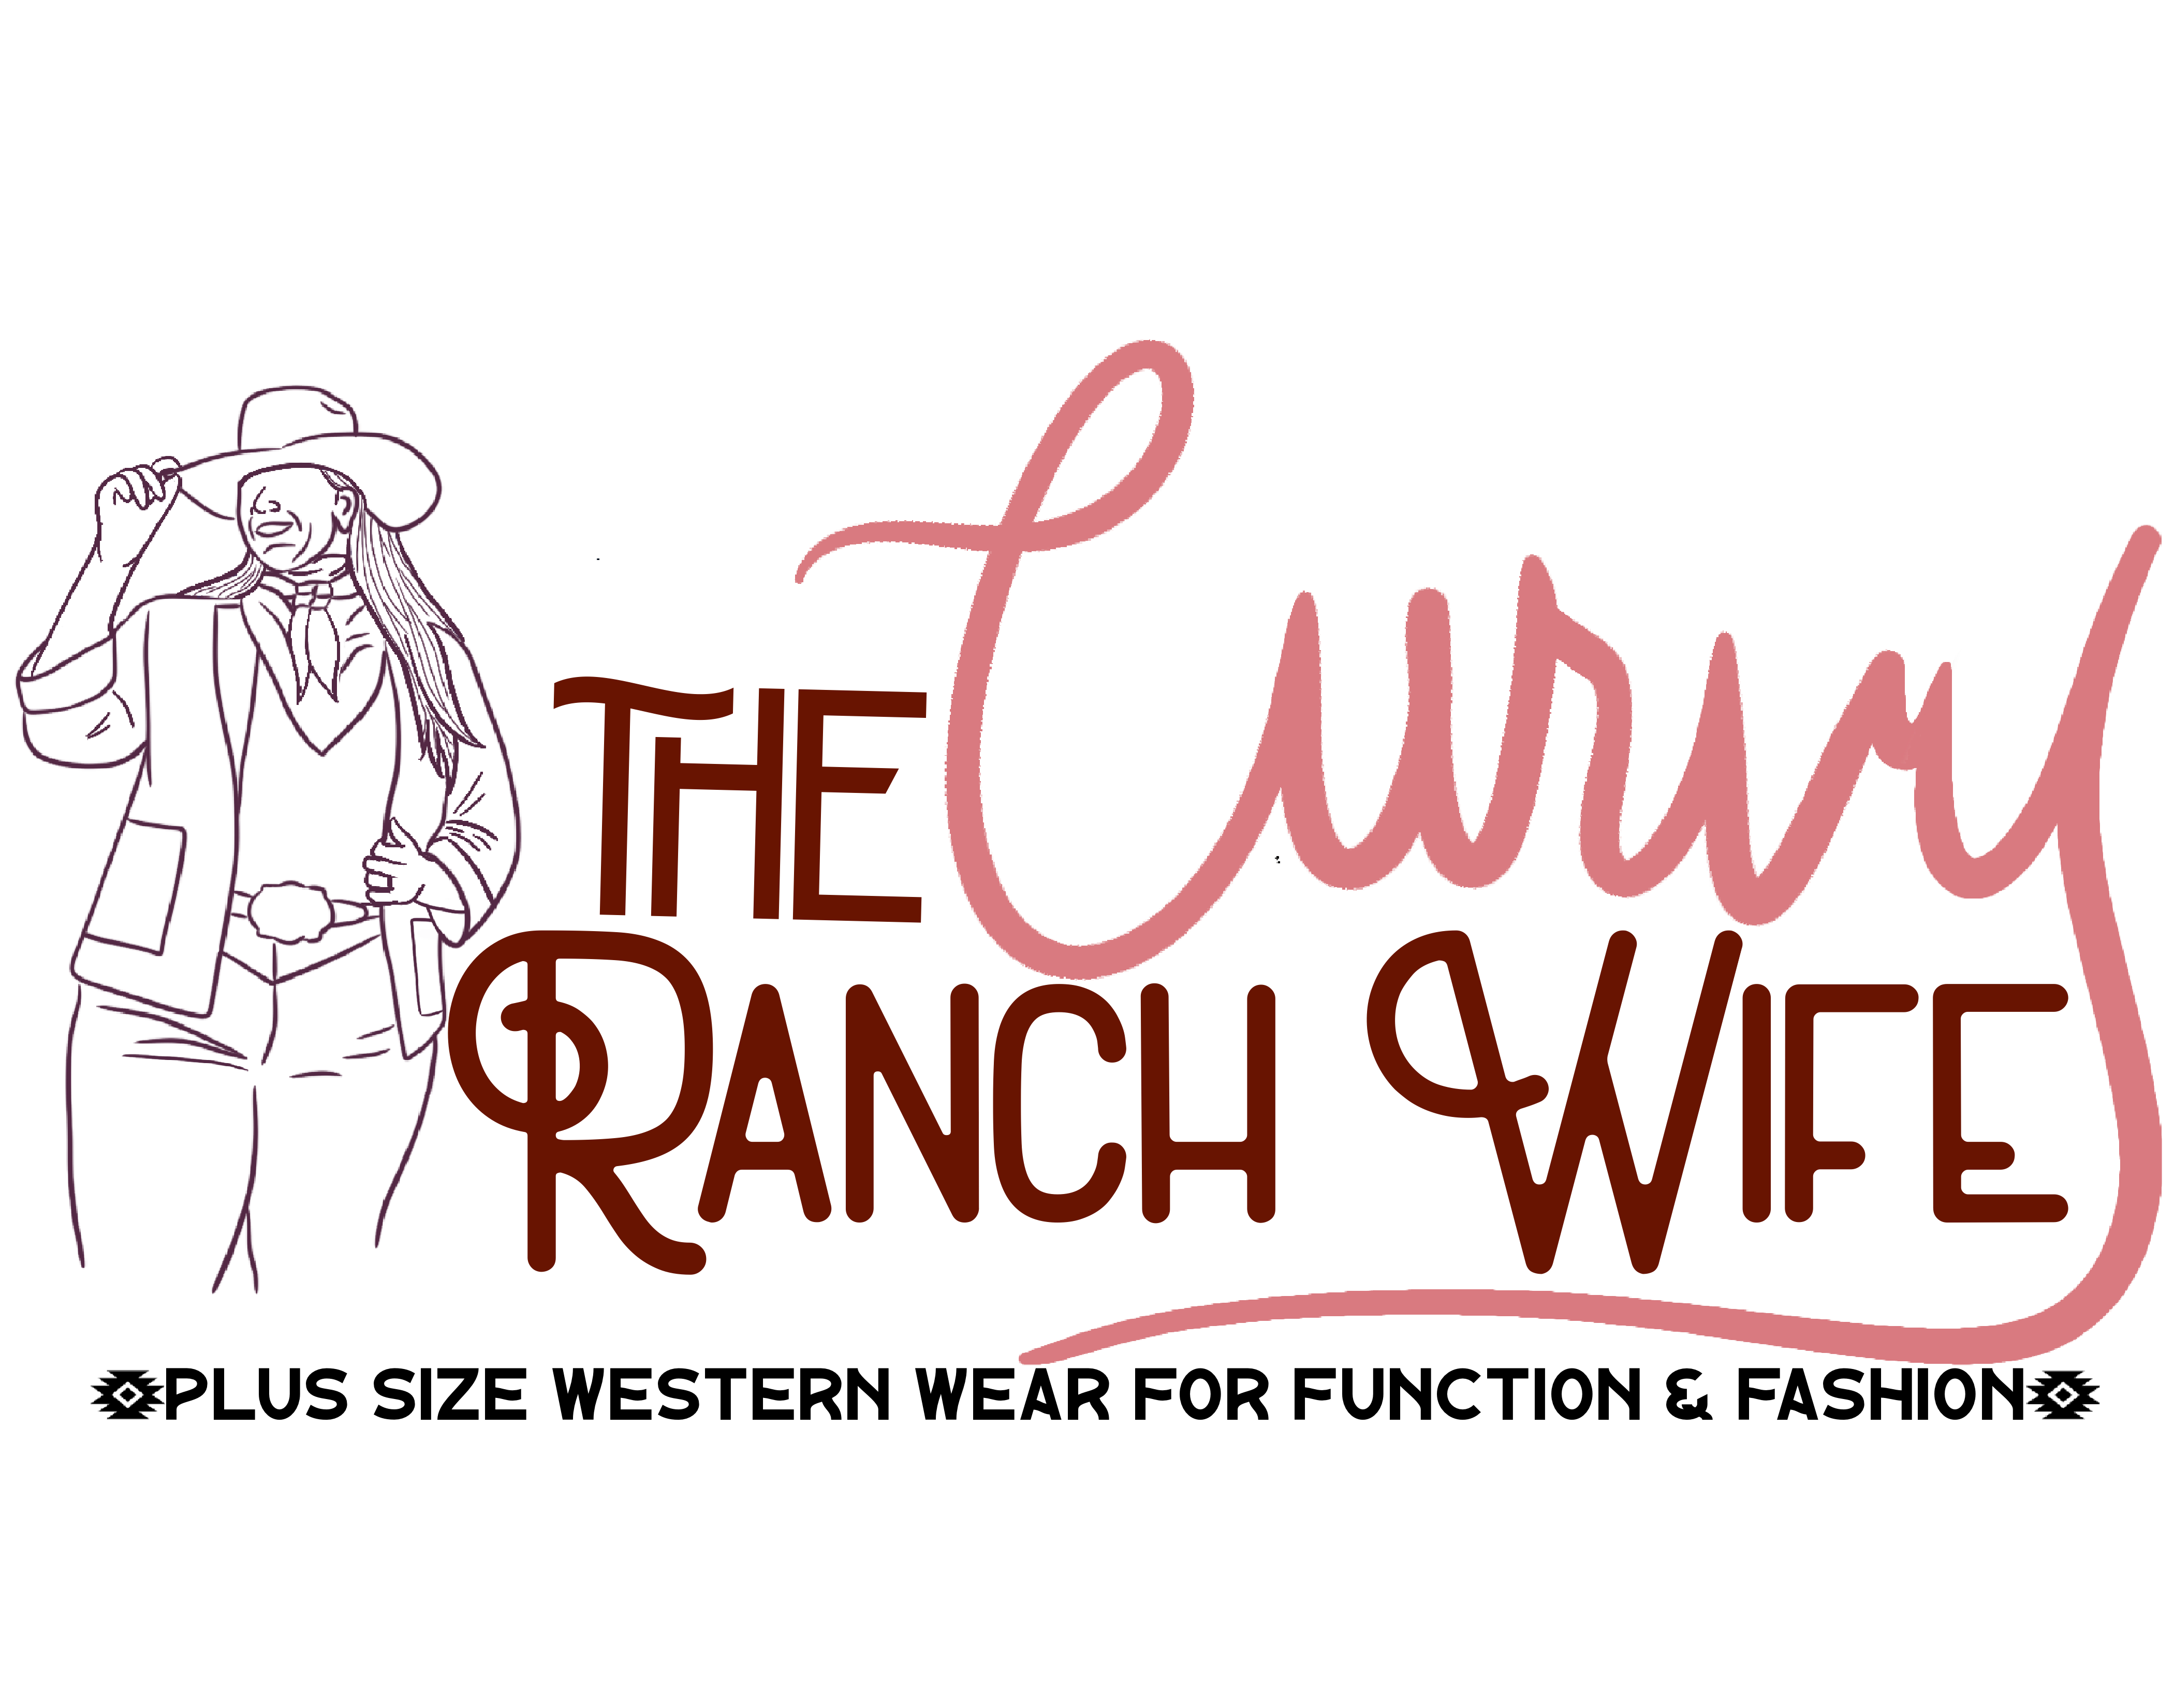 The Curvy Ranch WIfe Boutique – The Curvy Ranch Wife